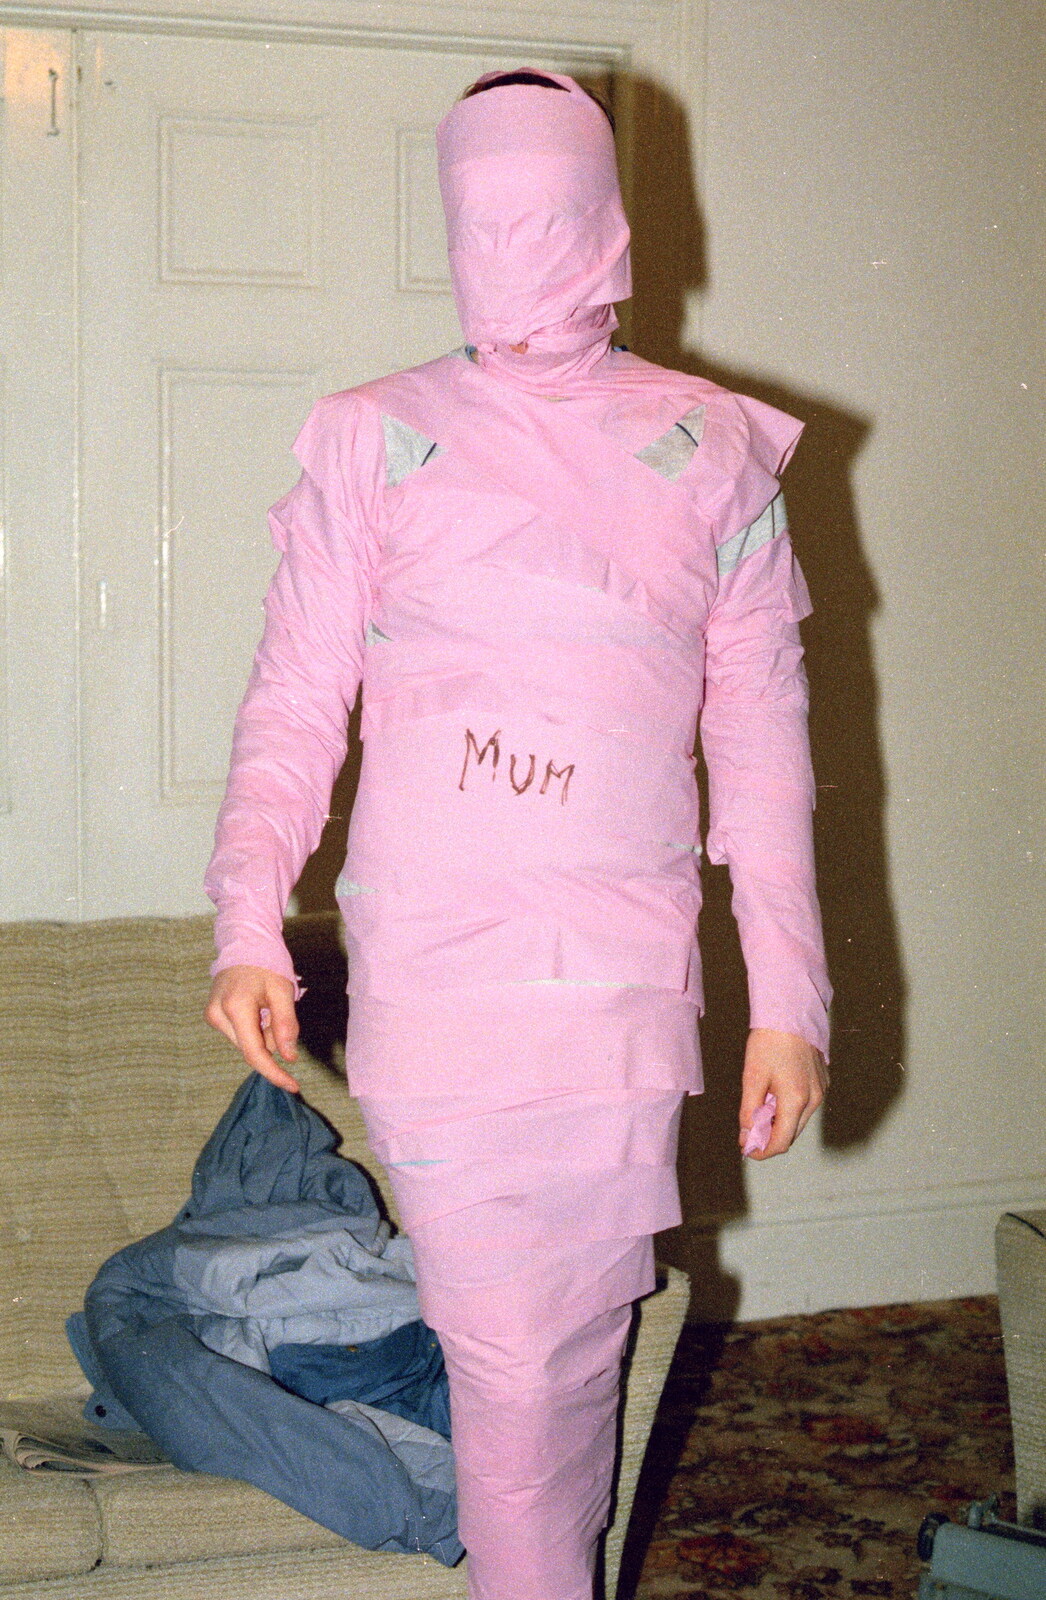 Malcolm the toilet-roll mummy from Uni: The End of Term and Whitsand Bay, Plymouth and New Milton - 21st March 1986